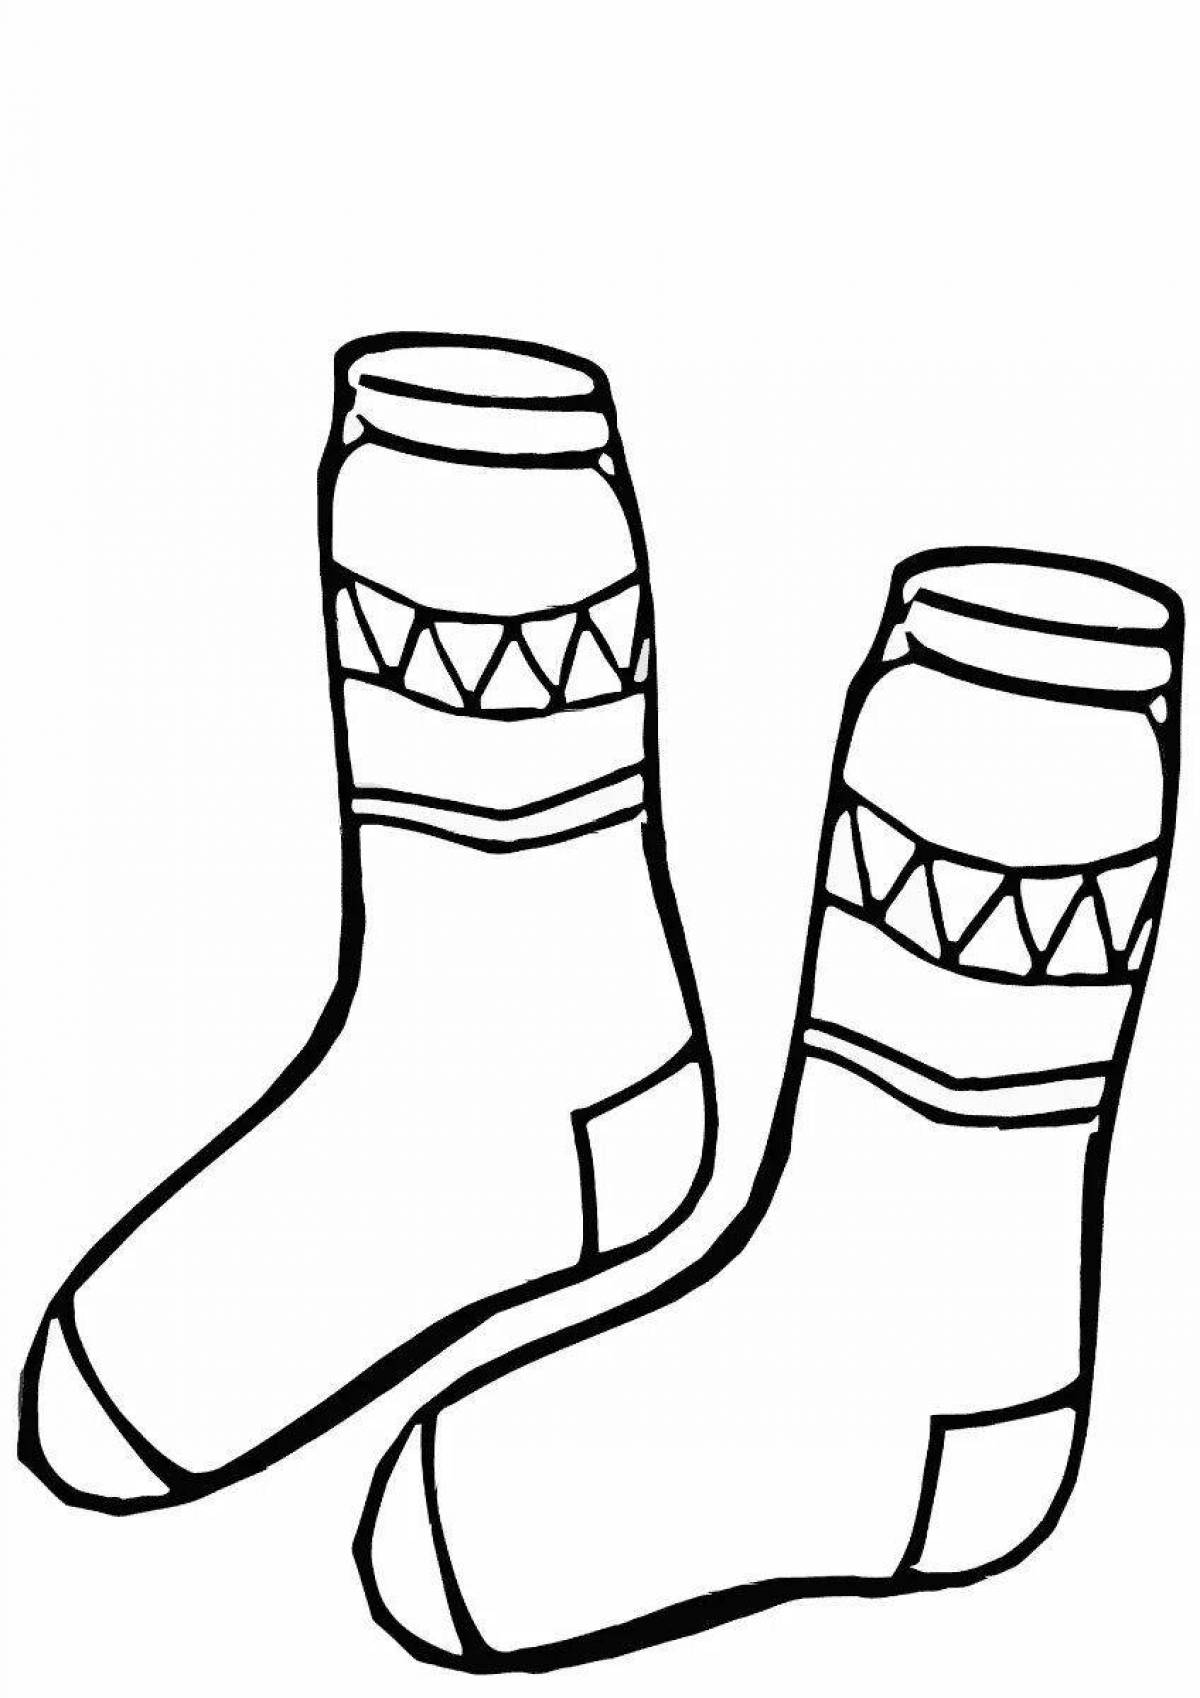 Coloring page sweet winter clothes